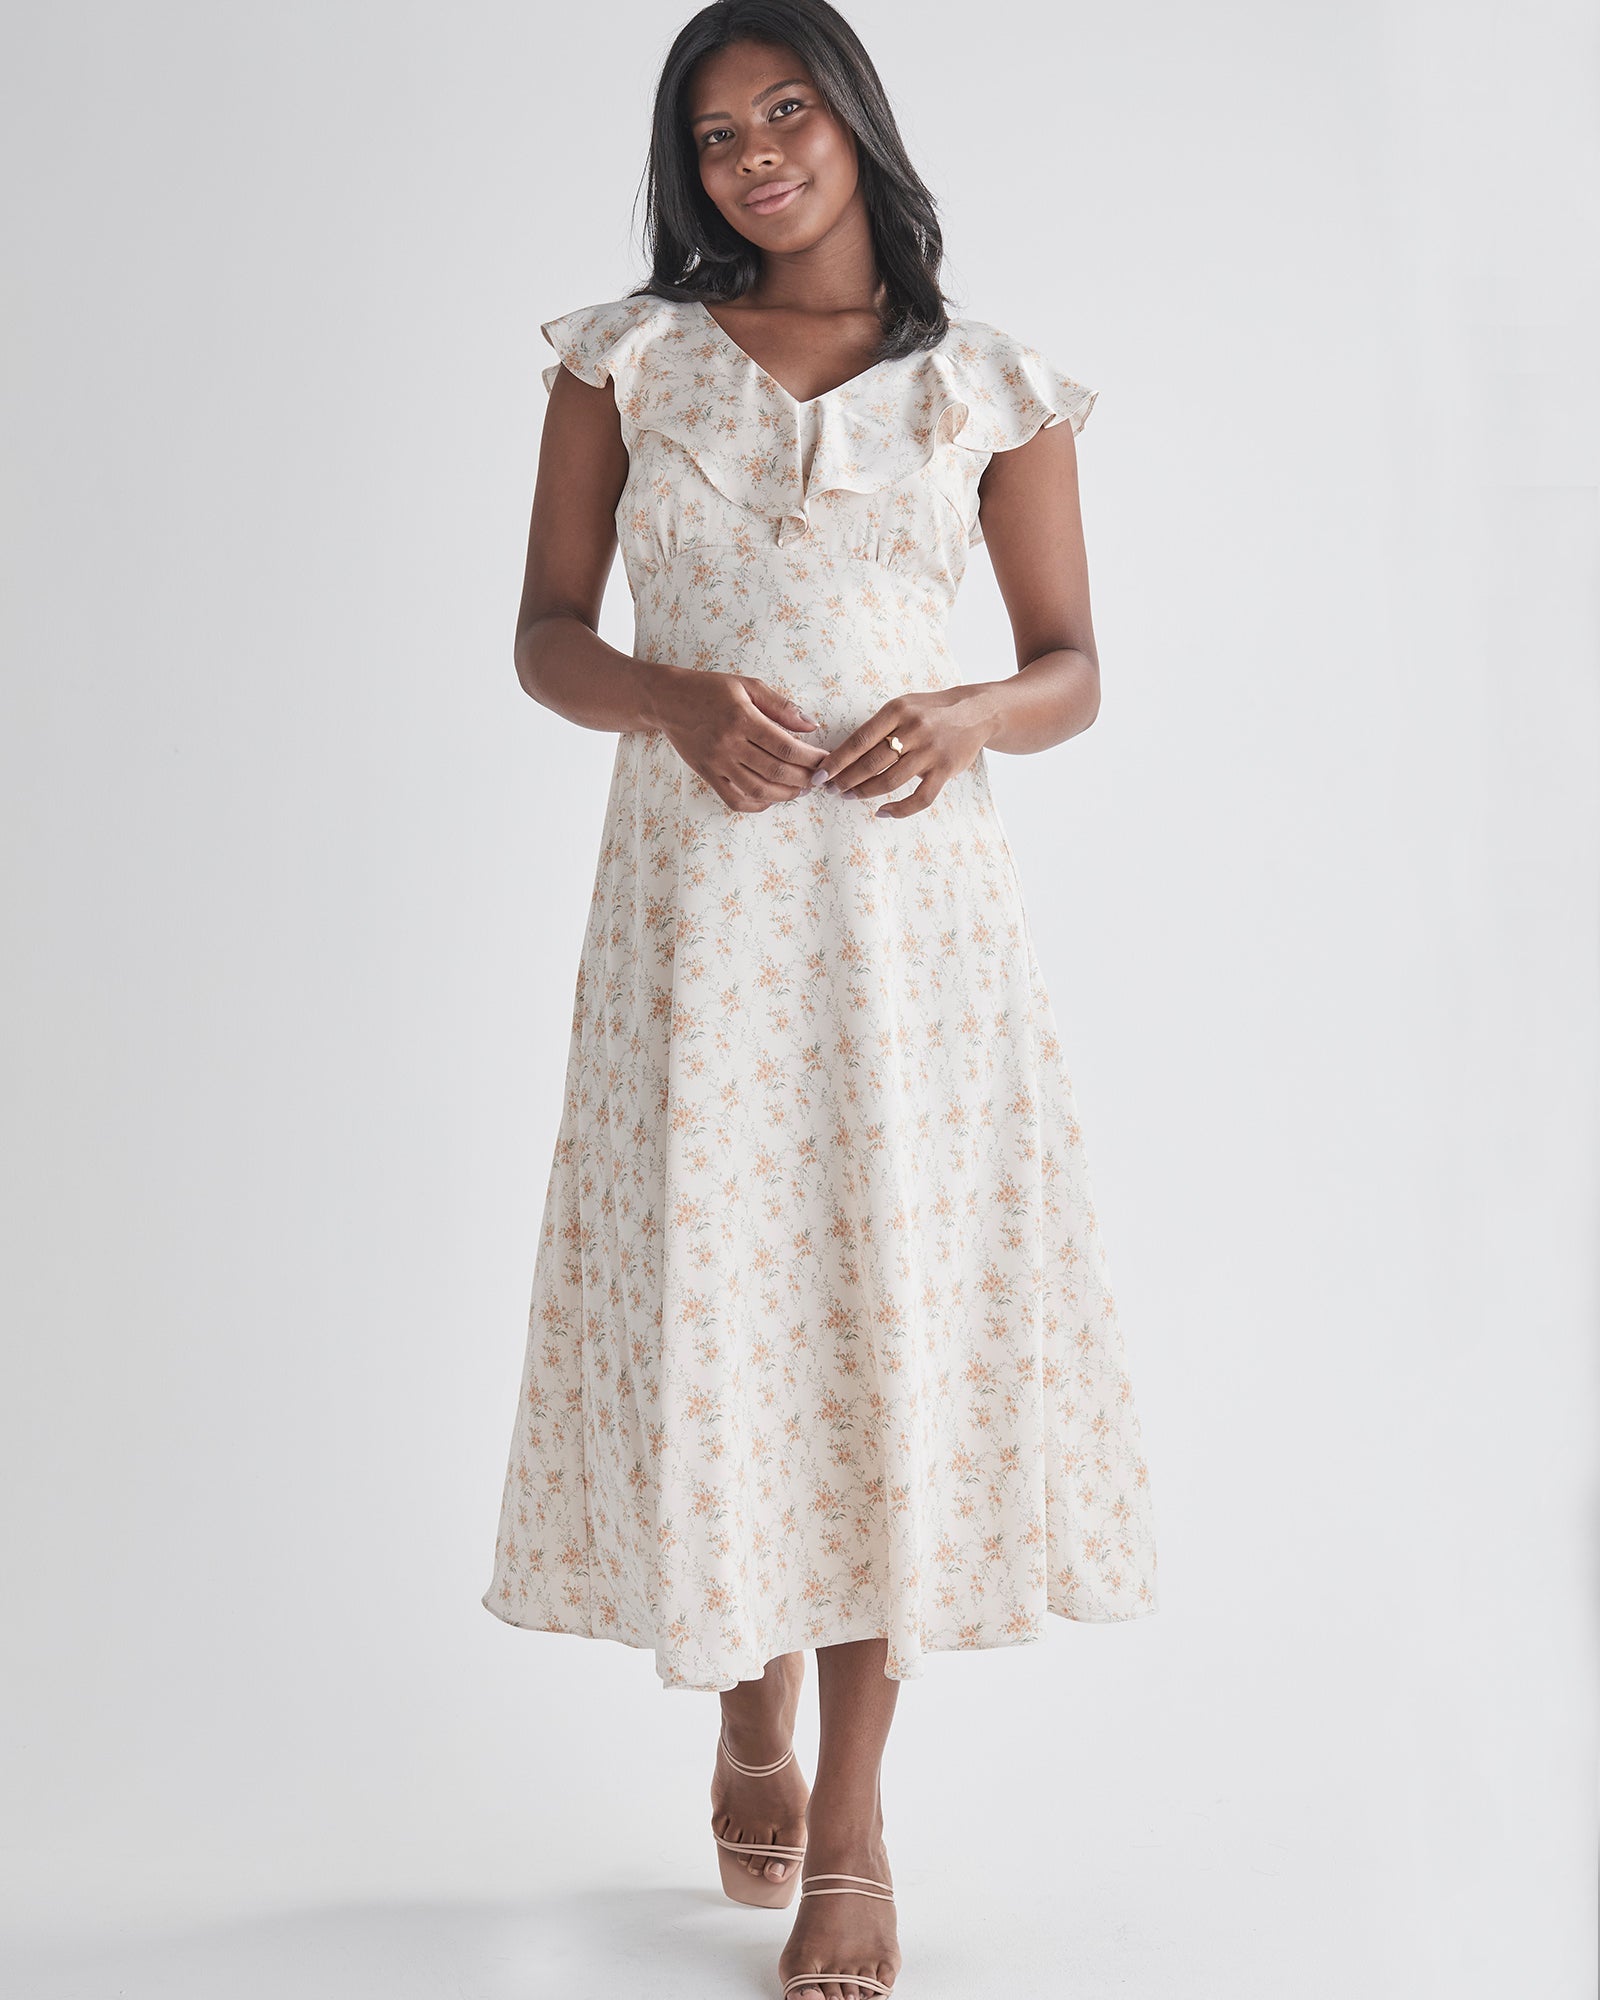 Front view-Delicate ruffle detail at neckline - Smocked, stretch back for comfort - Midi length A-line - Lined top fron Angel Maternity